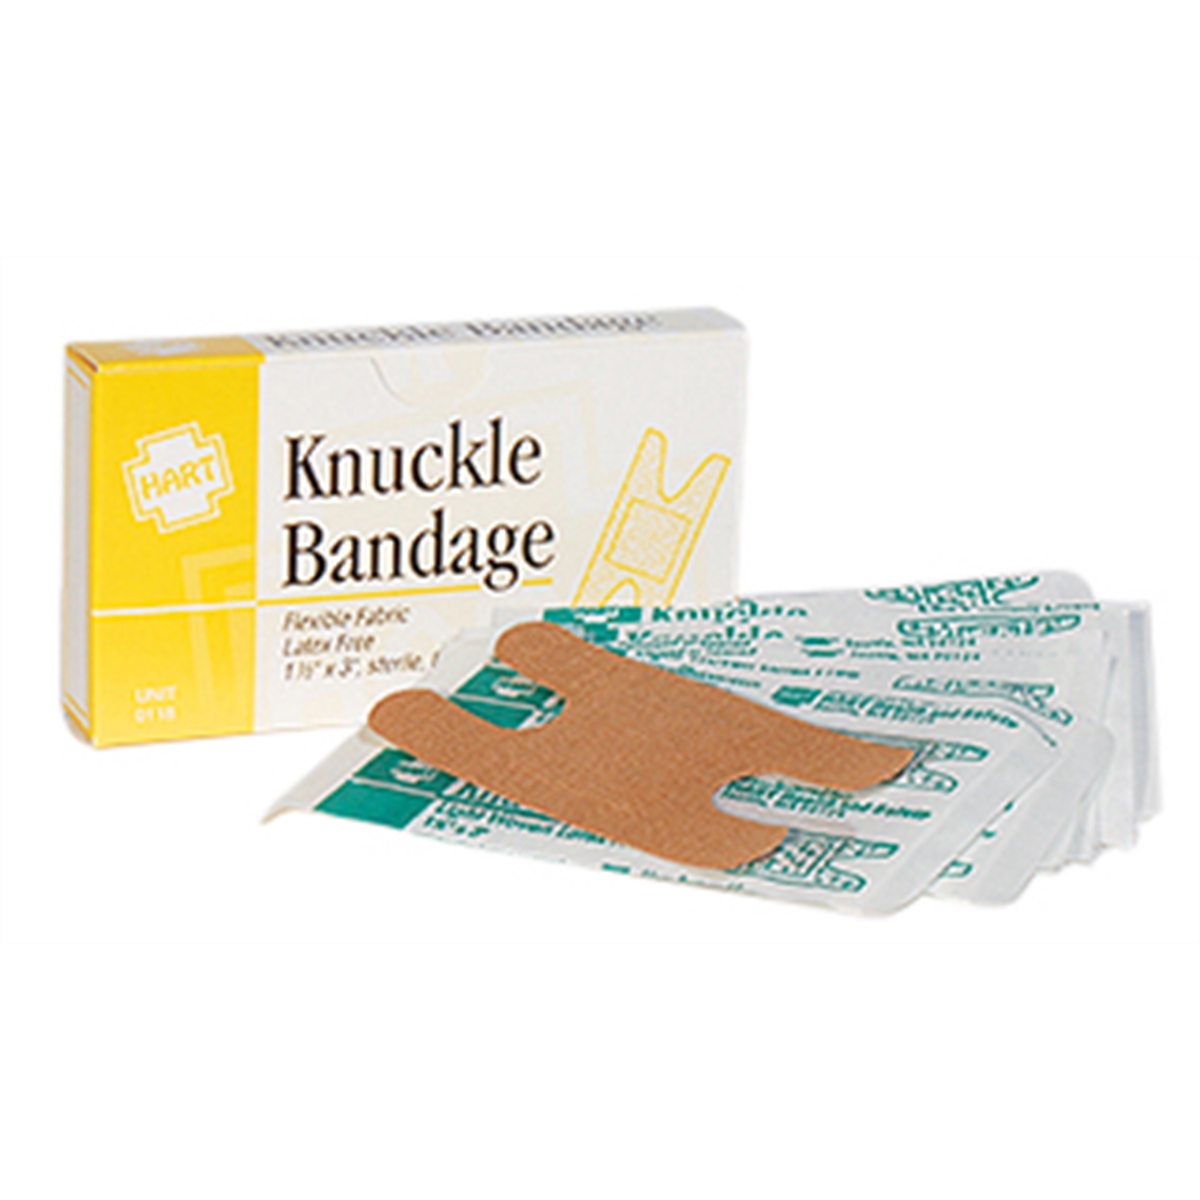 Picture of Chaos Safety Supplies CSU118 Hart Liteflex Adhesive Bandage for Knuckle - 8 per Case